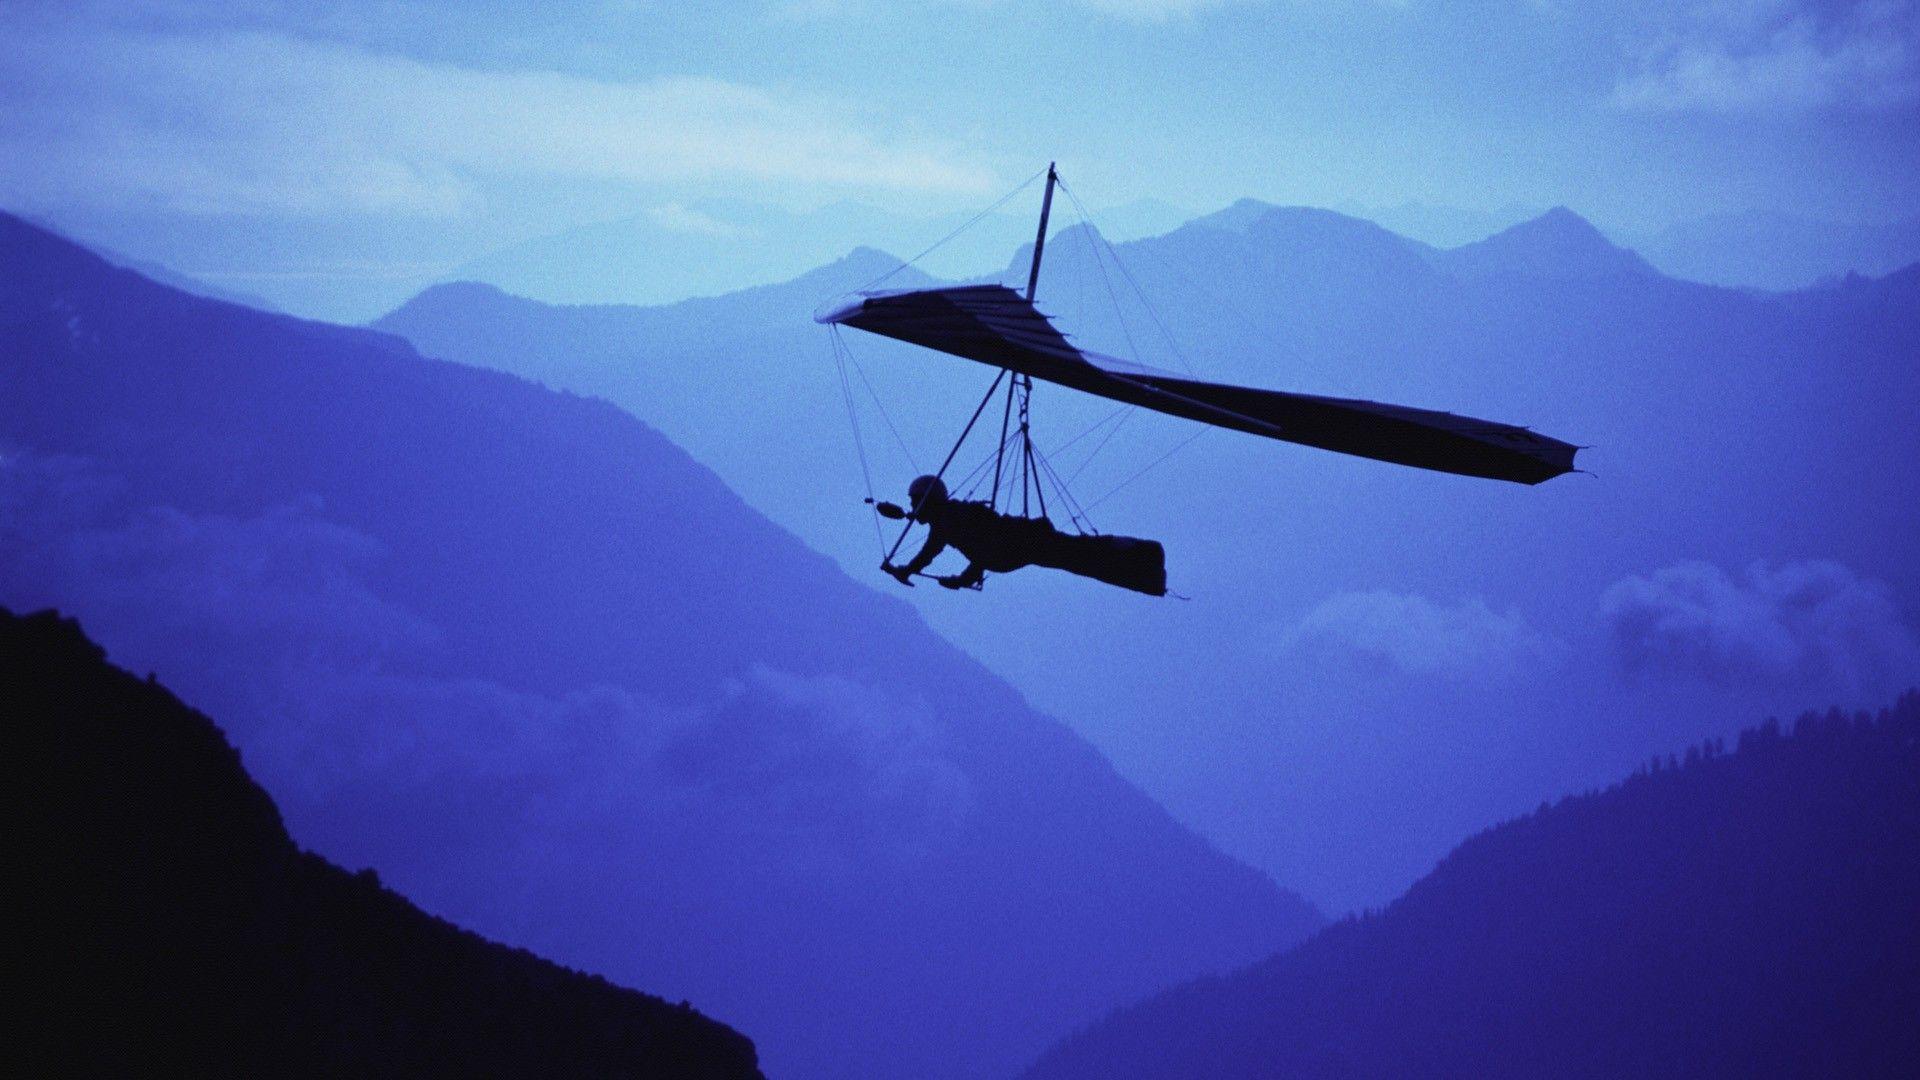 Image detail for -Hang glider over the mountains. Wallpaper To You